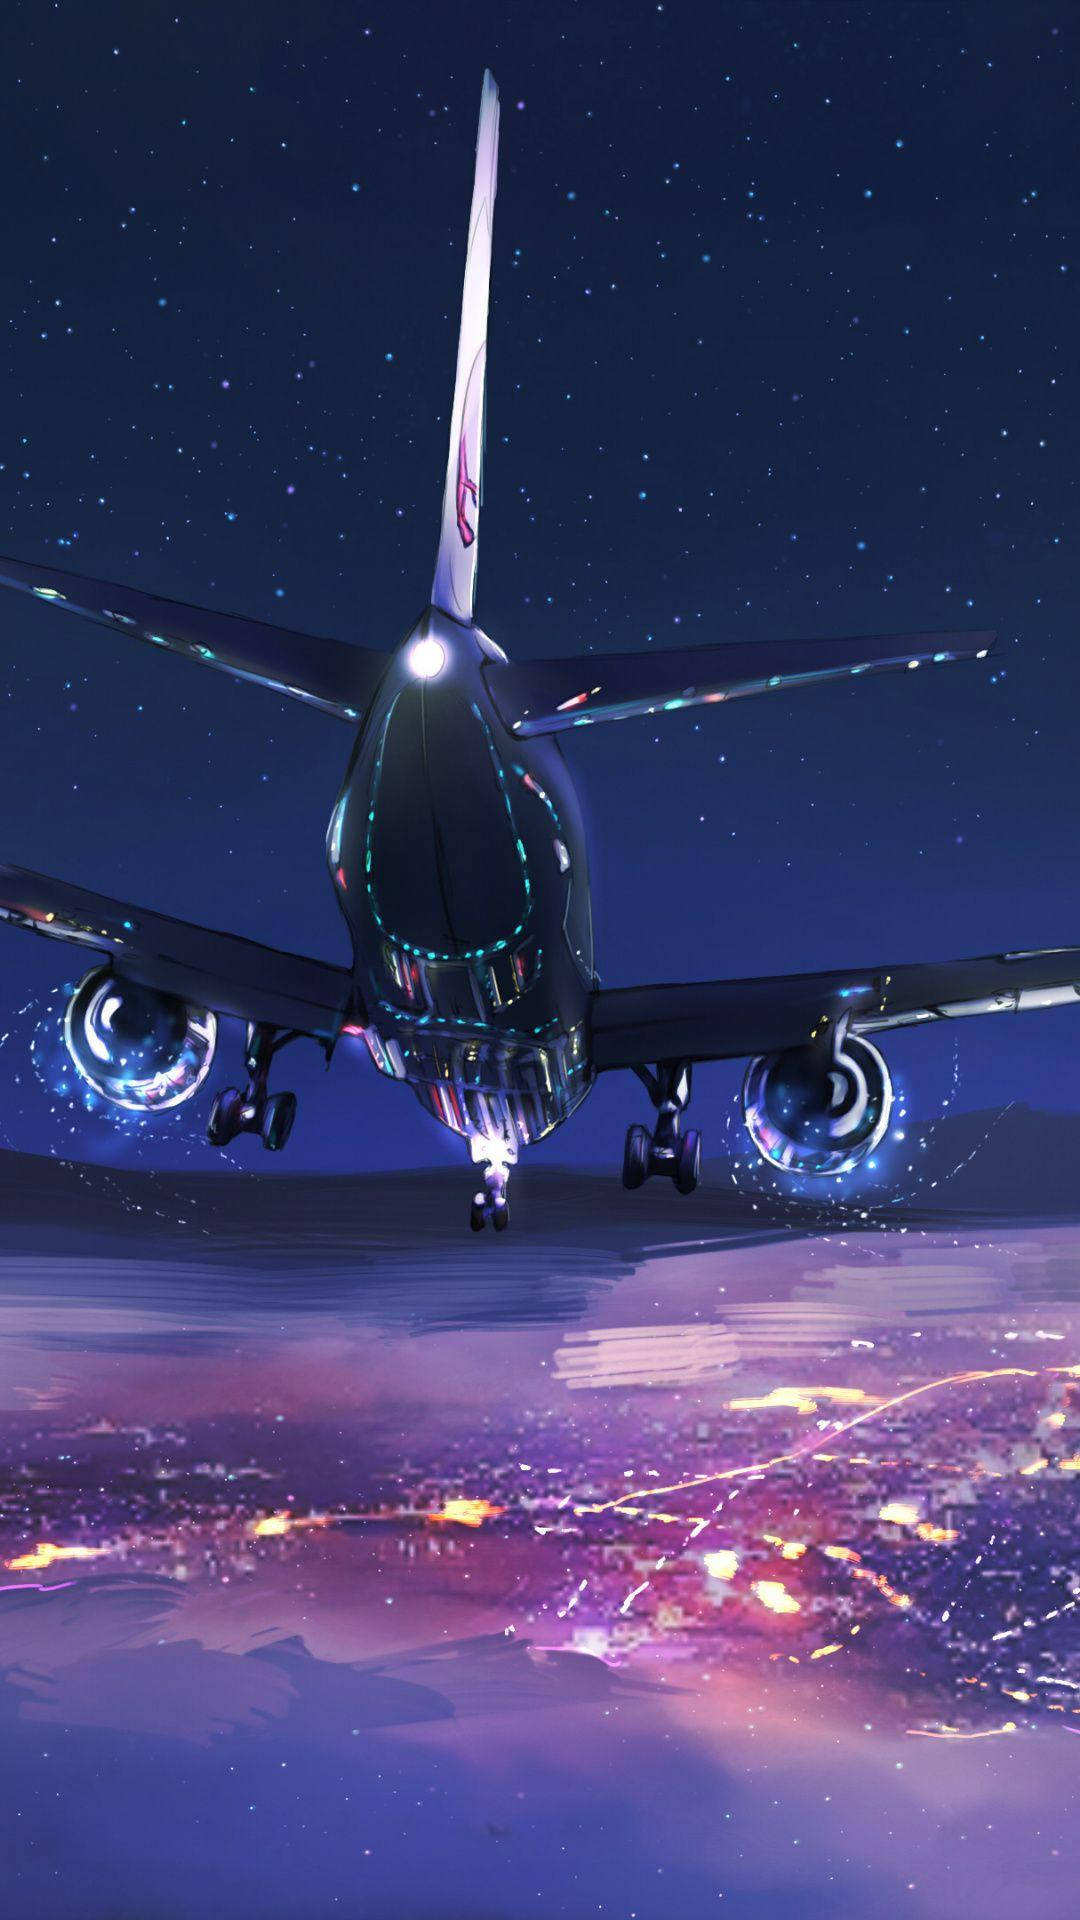 Landing Airplane Android With City Lights Background